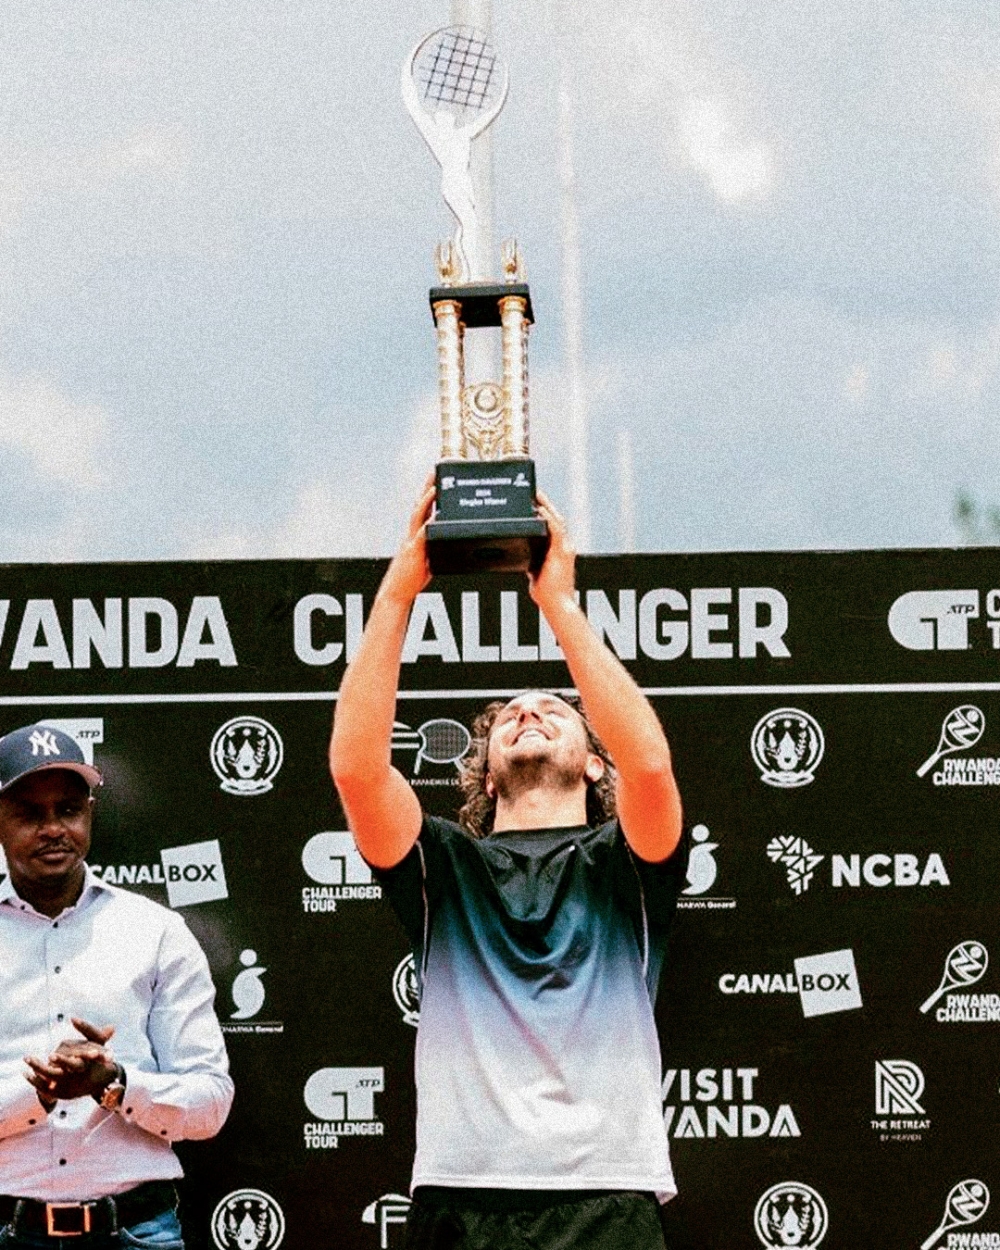 Argentine Marco Trungelliti won Rwanda Challenger 2 after beating French Clement Tabur 6-4, 6-2 in the final on Sunday-courtesy